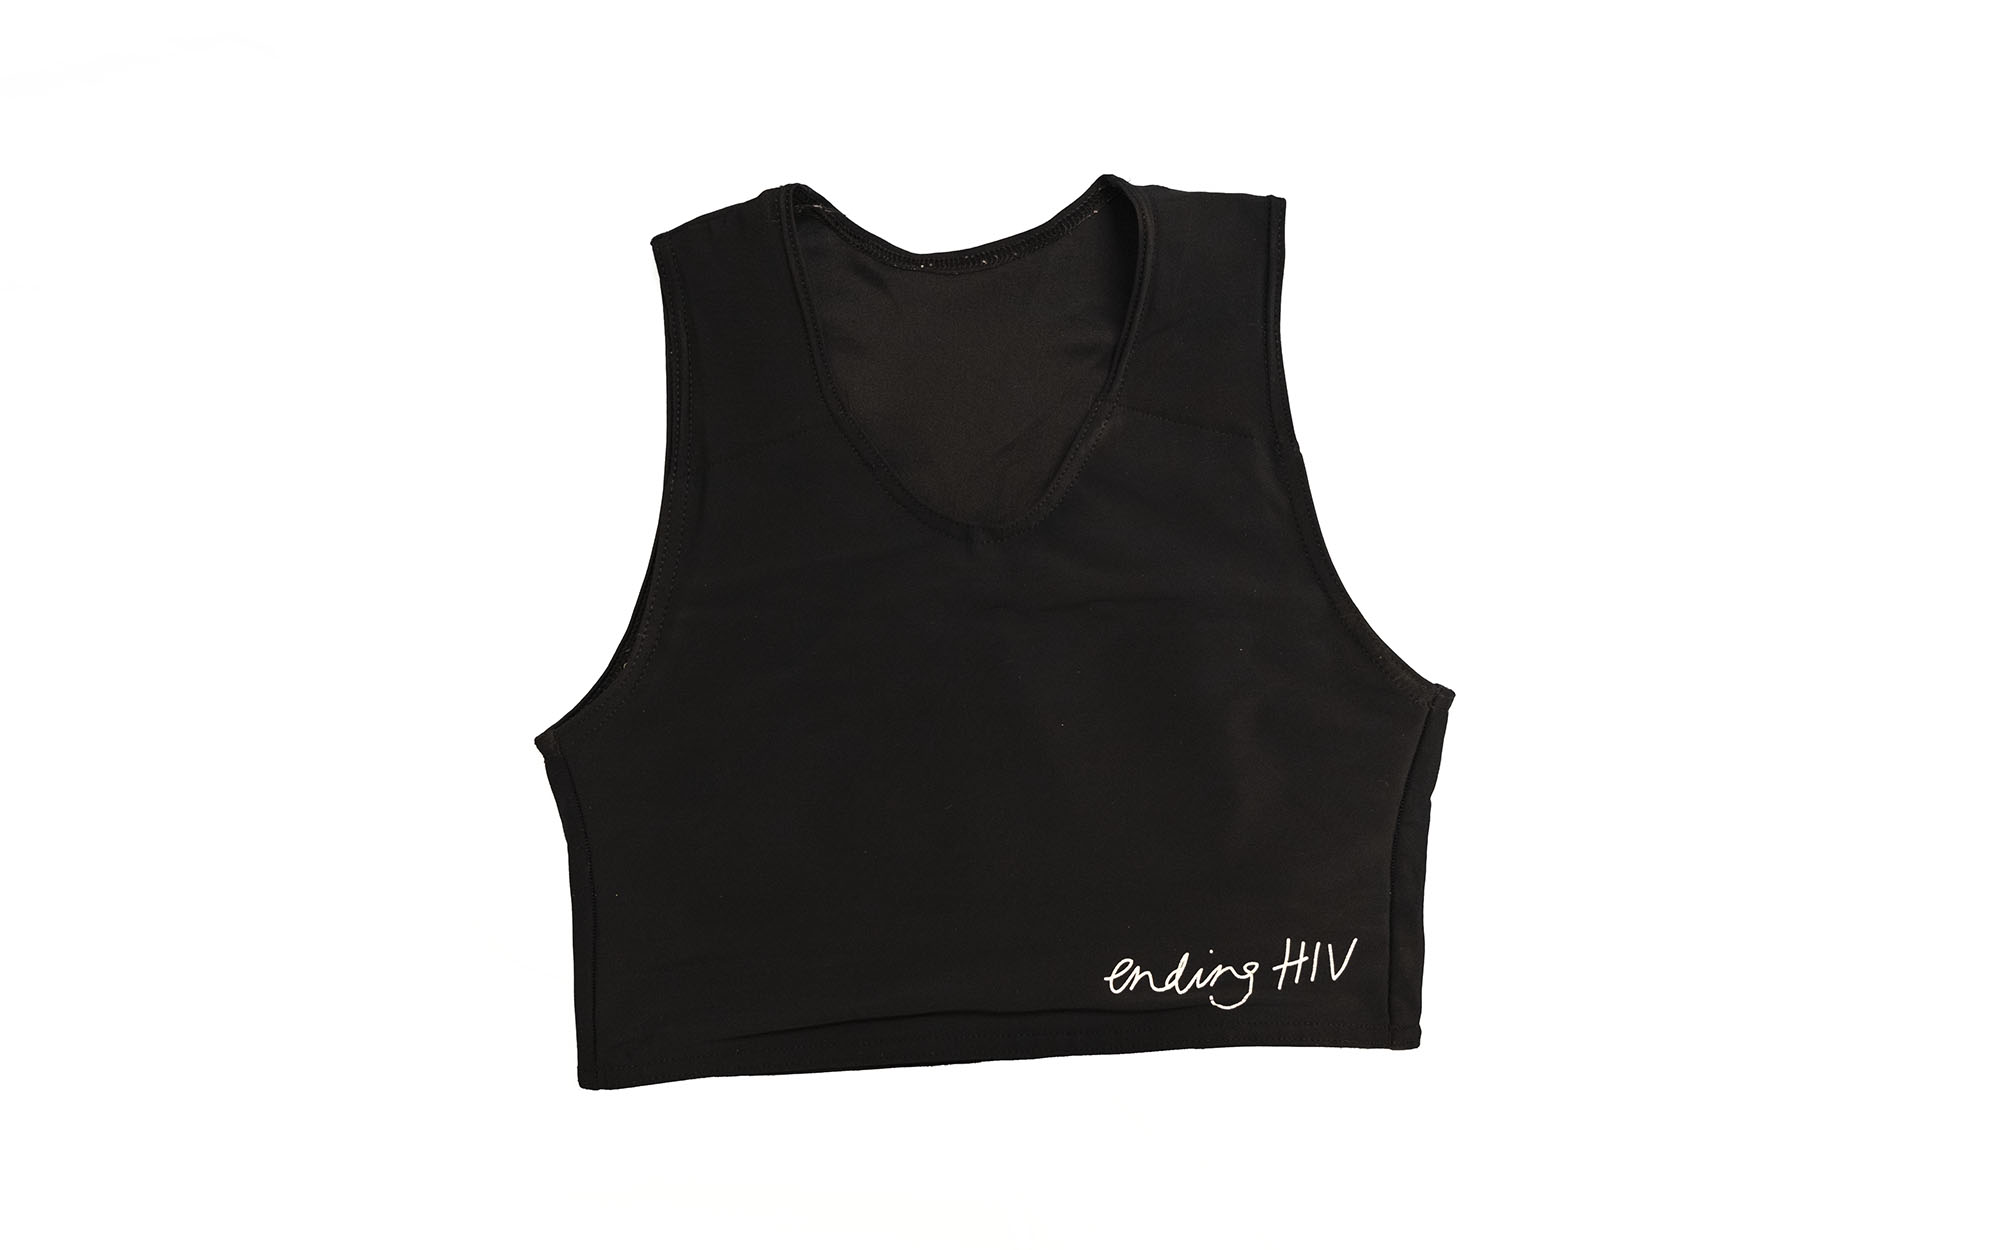 Black chest binder with "ending HIV" written on it in white